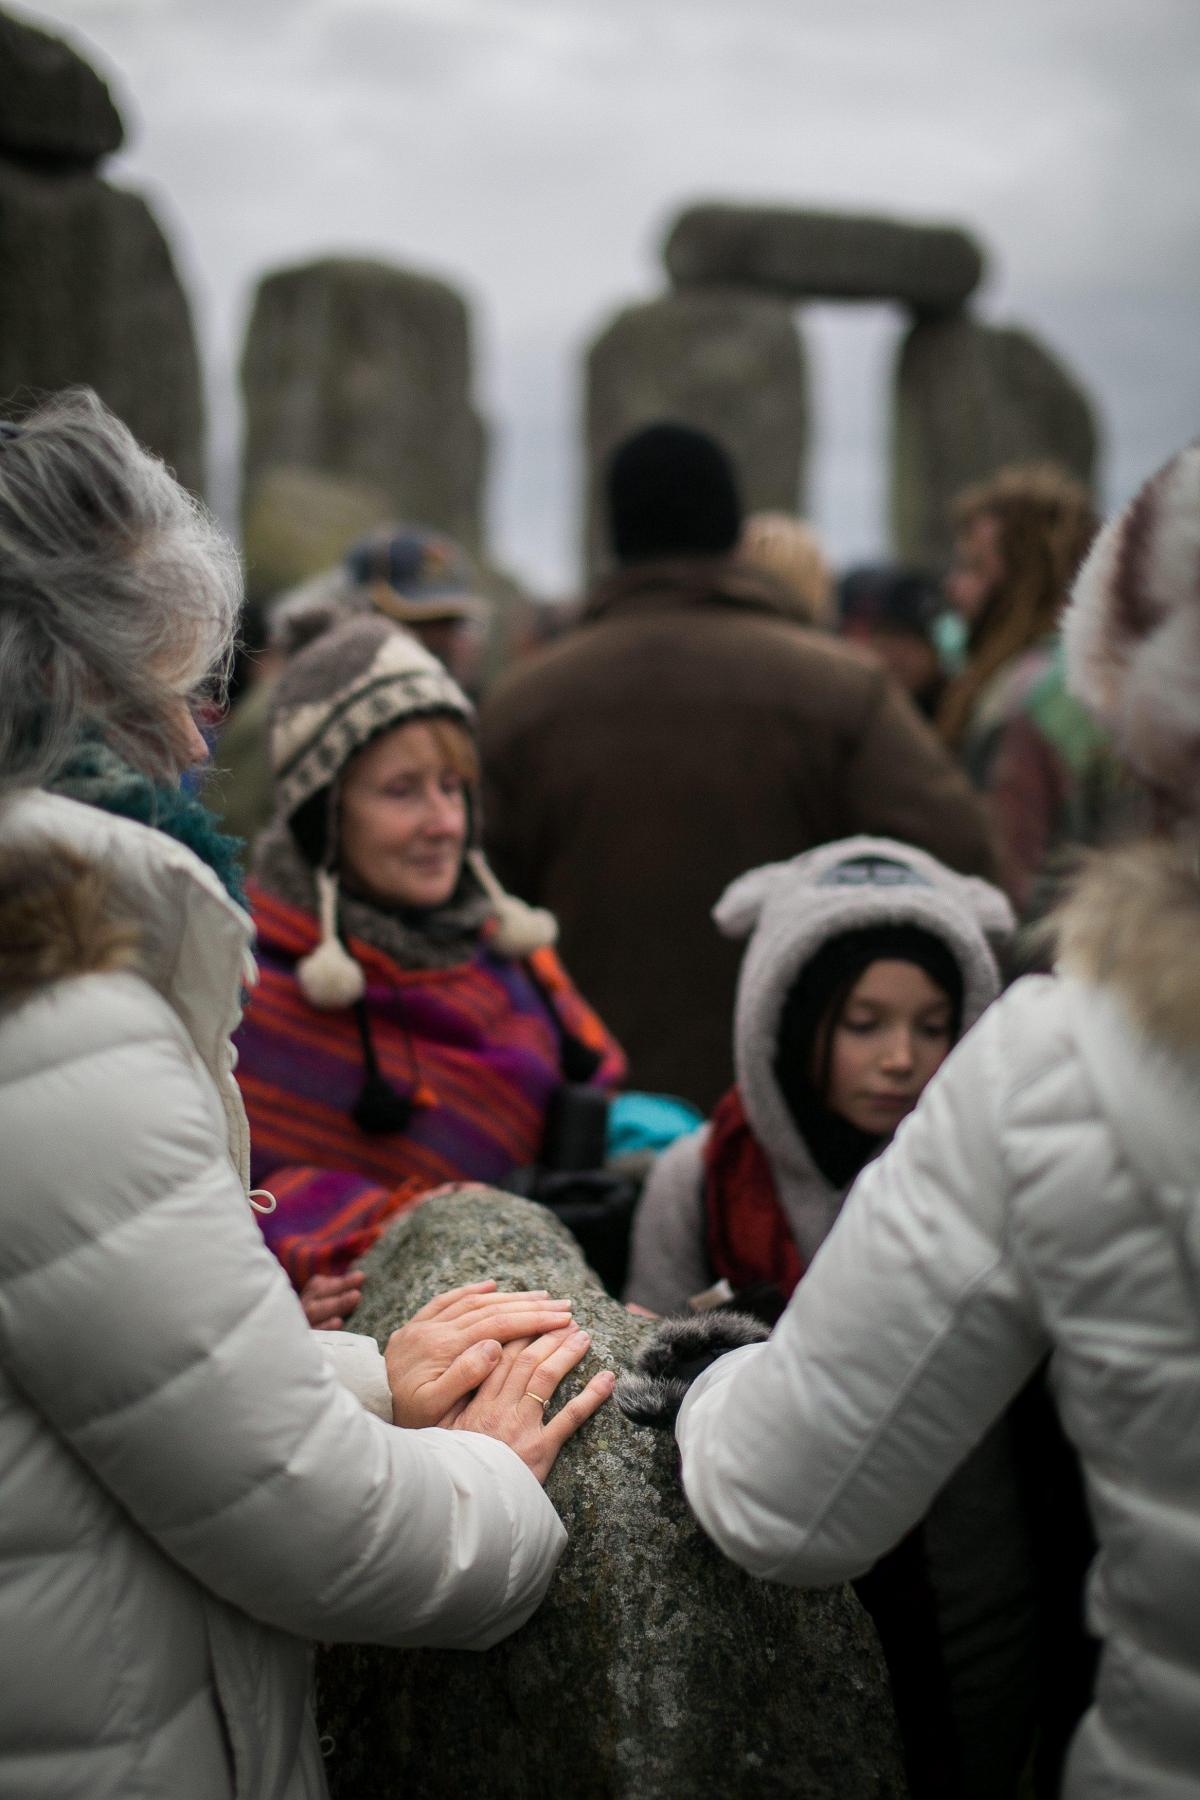 Winter Solstice celebrations at Stonehenge. Pictures by South West News Service